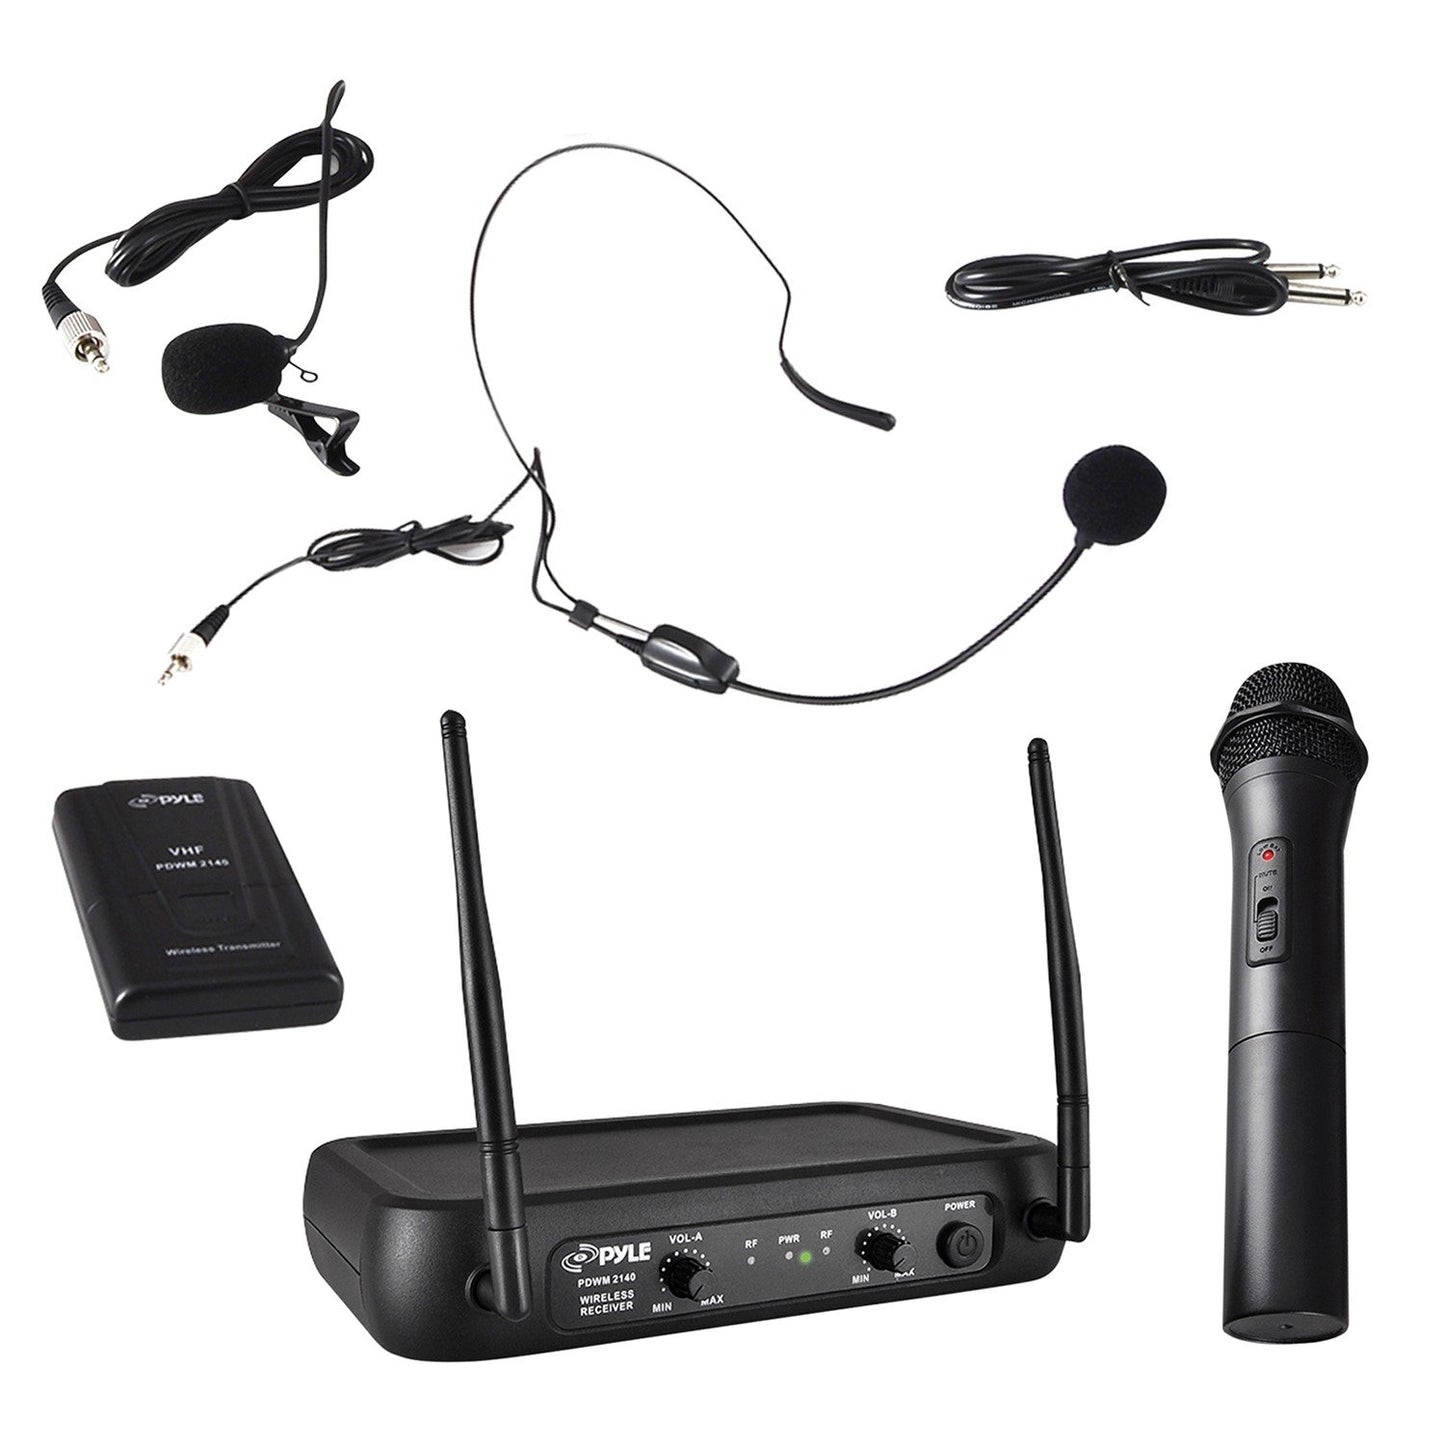 Pyle PDWM2140 Dual-Channel Fixed-Frequency VHF Wireless Microphone System